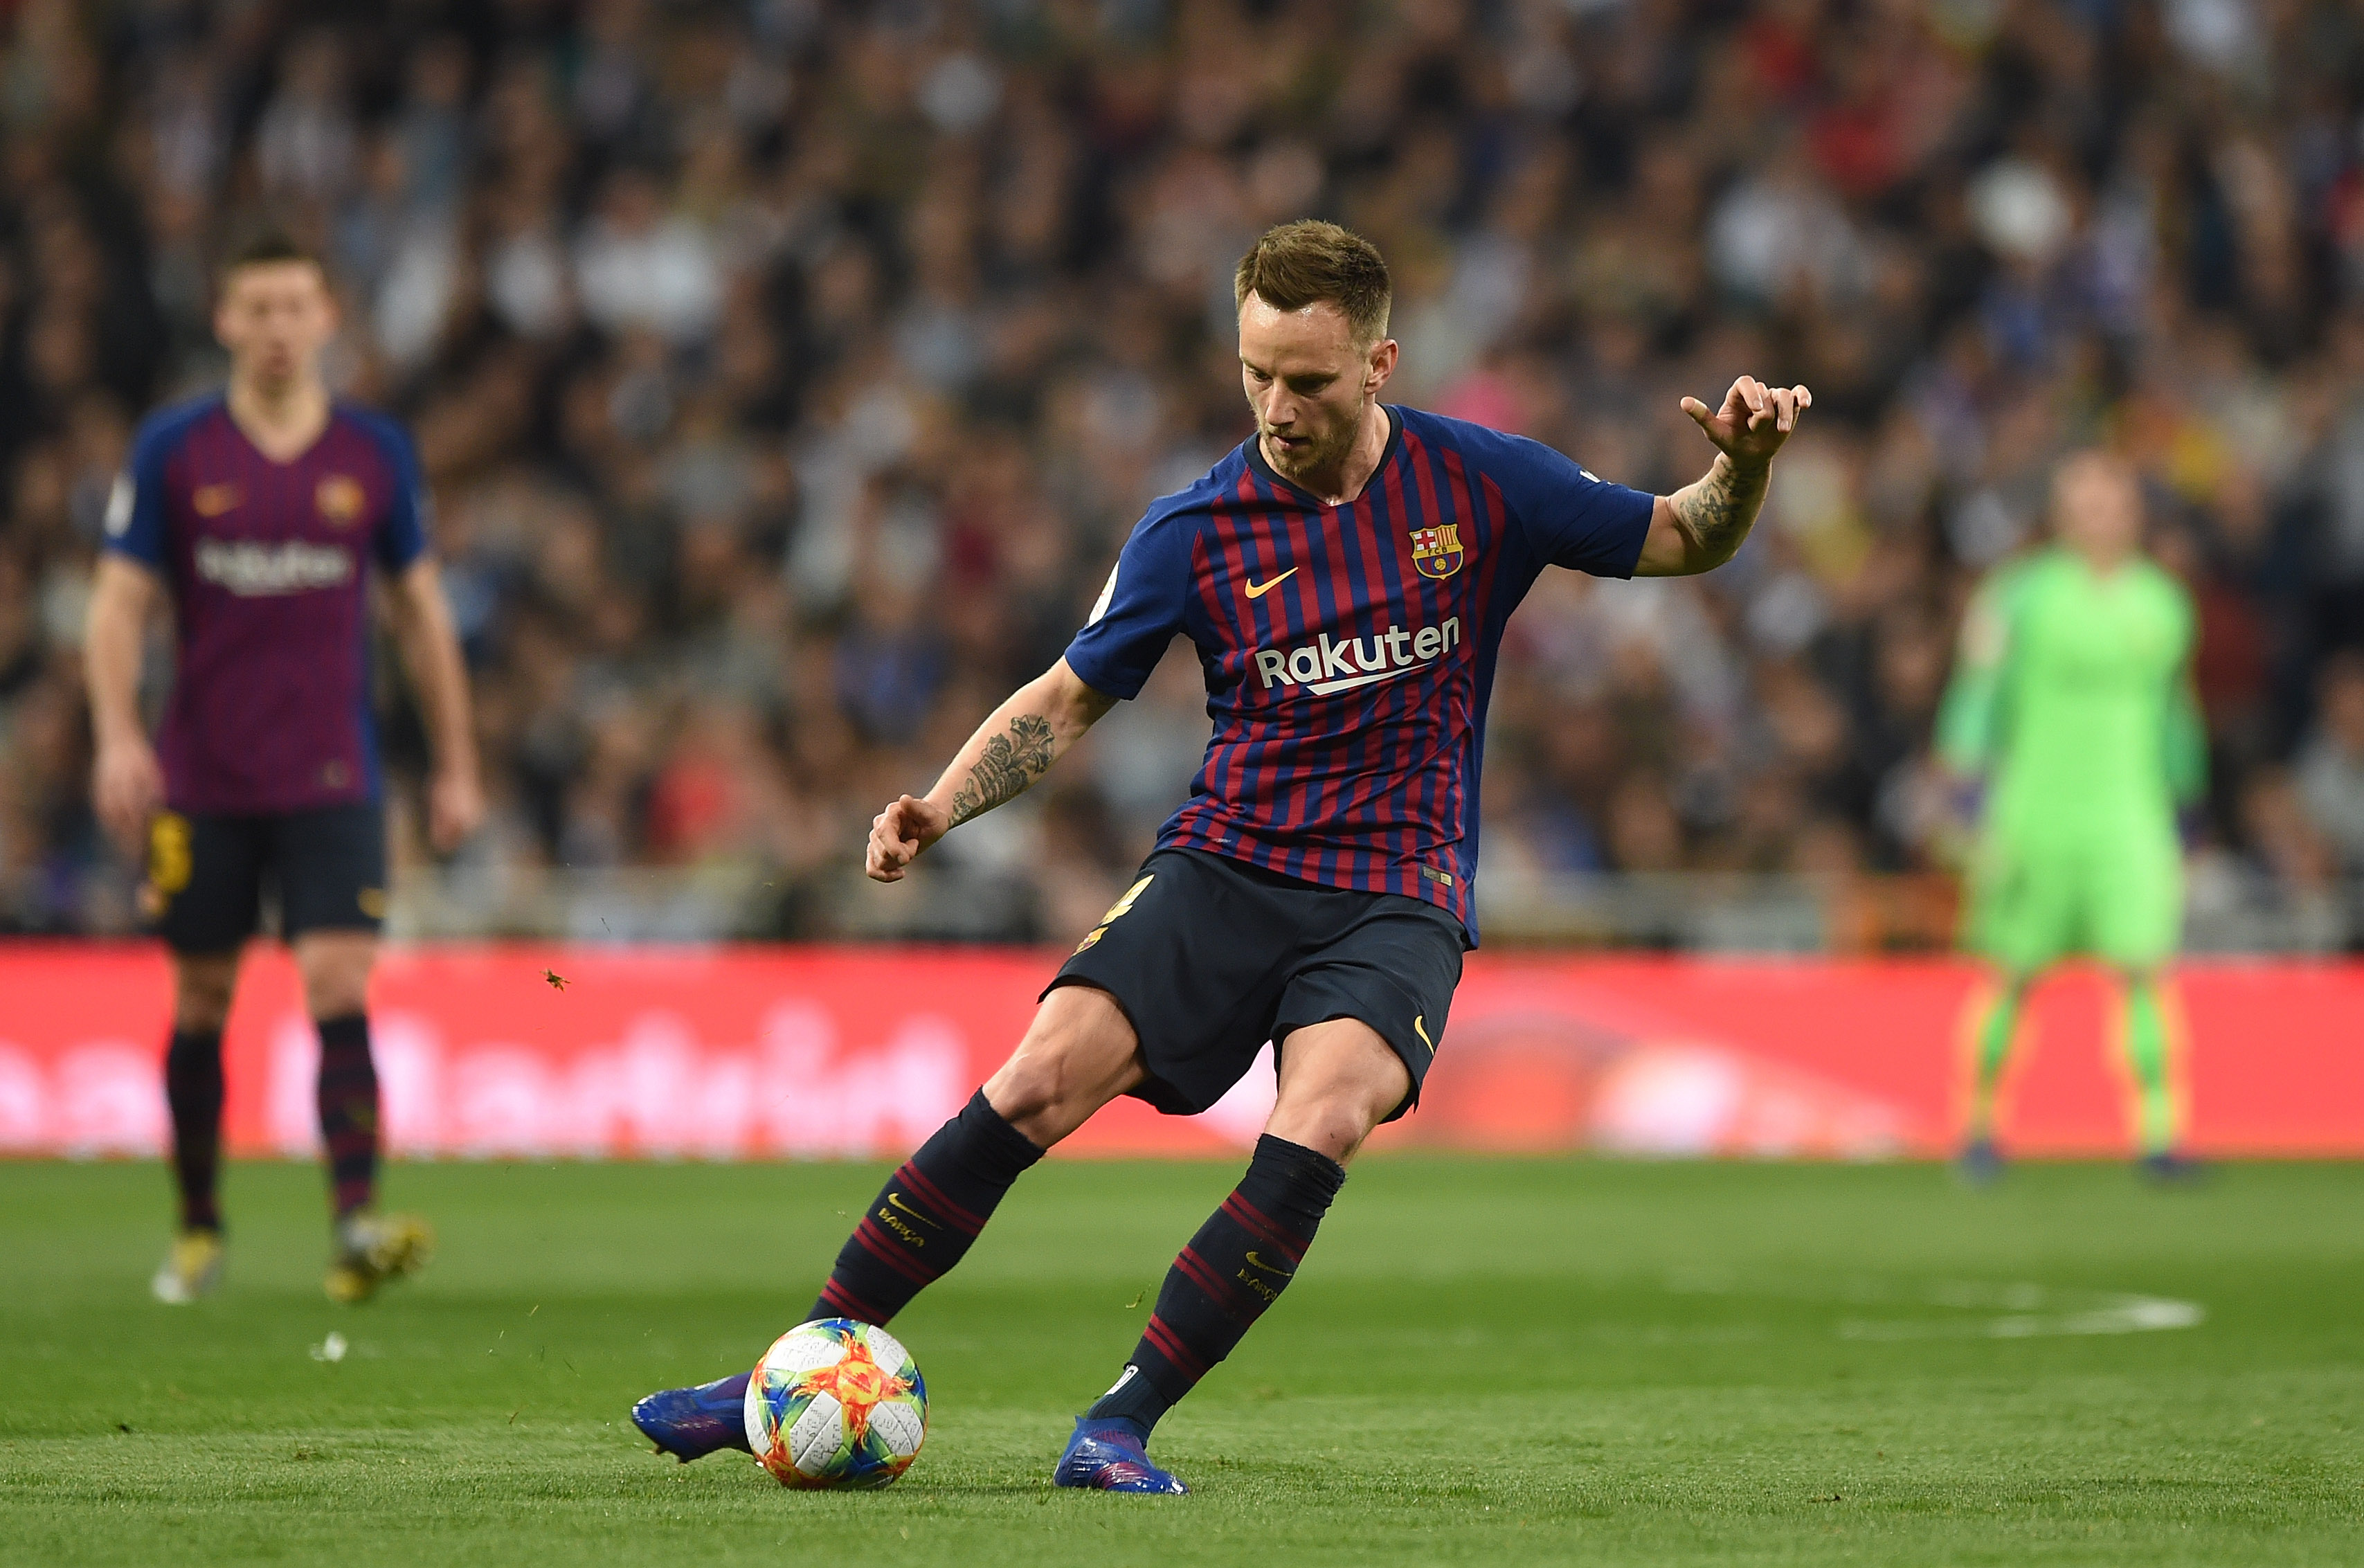 MADRID, SPAIN - FEBRUARY 27: Ivan Rakitic of FC Barcelona passes the ball during the Copa del Semi Final match second leg between Real Madrid and Barcelona at Bernabeu on February 27, 2019 in Madrid, Spain. (Photo by Denis Doyle/Getty Images)